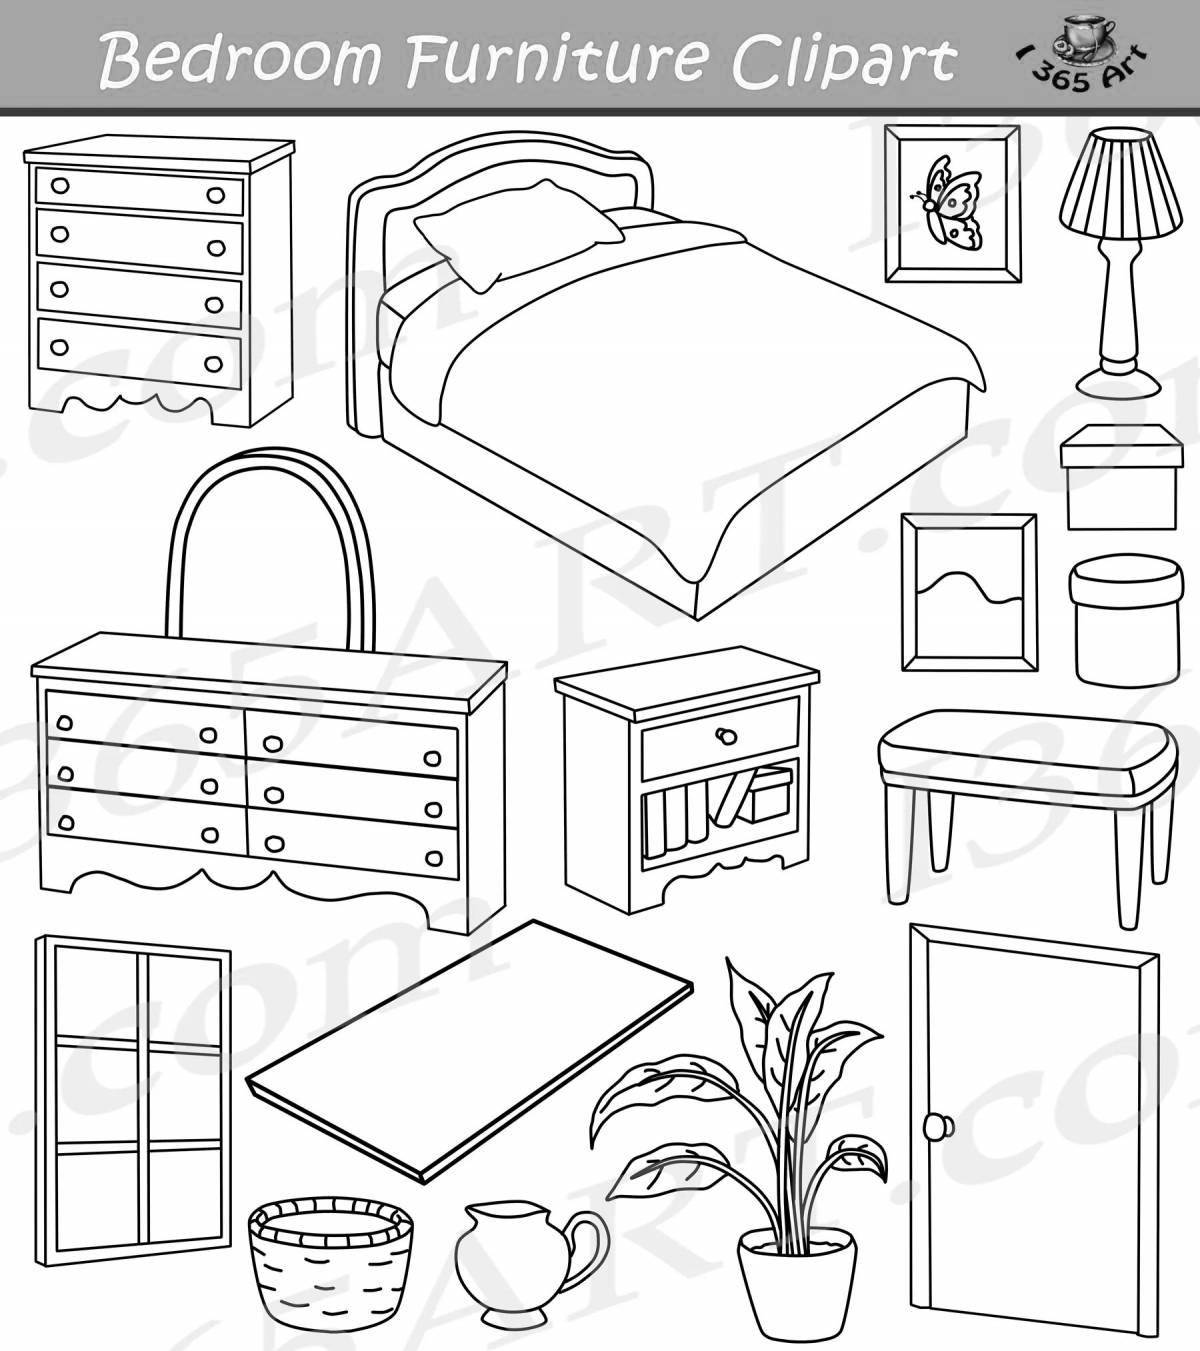 Playful coloring of bedroom furniture